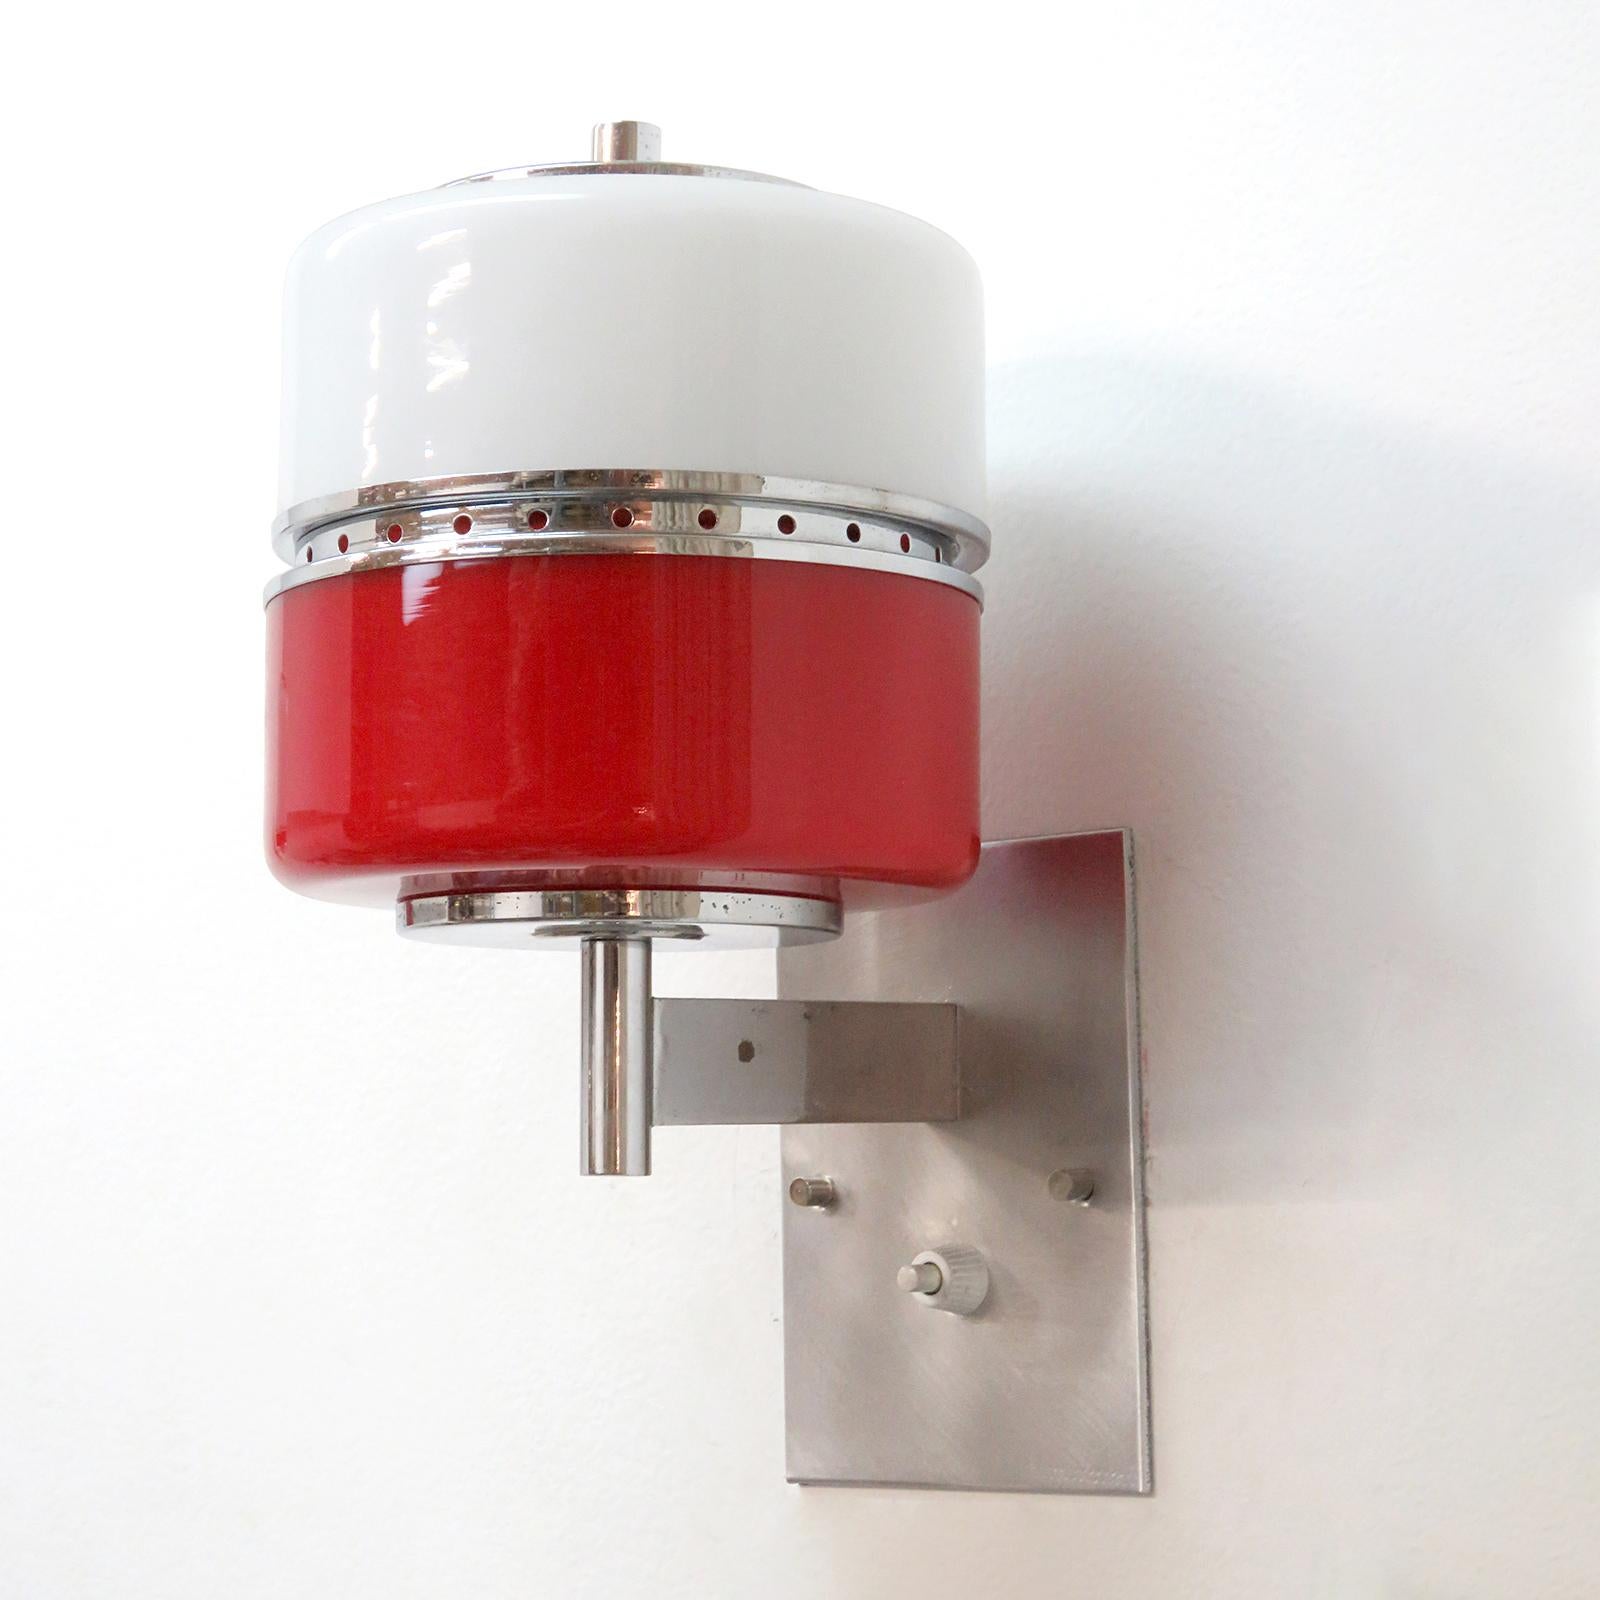 wonderful pair of cylindrical Italian wall lights from 1970 in red and white glass with chrome hardware, wired for US standards with individual on/off switches at each back plate, one E27 socket, max. wattage 75w, bulb provided as a onetime courtesy.